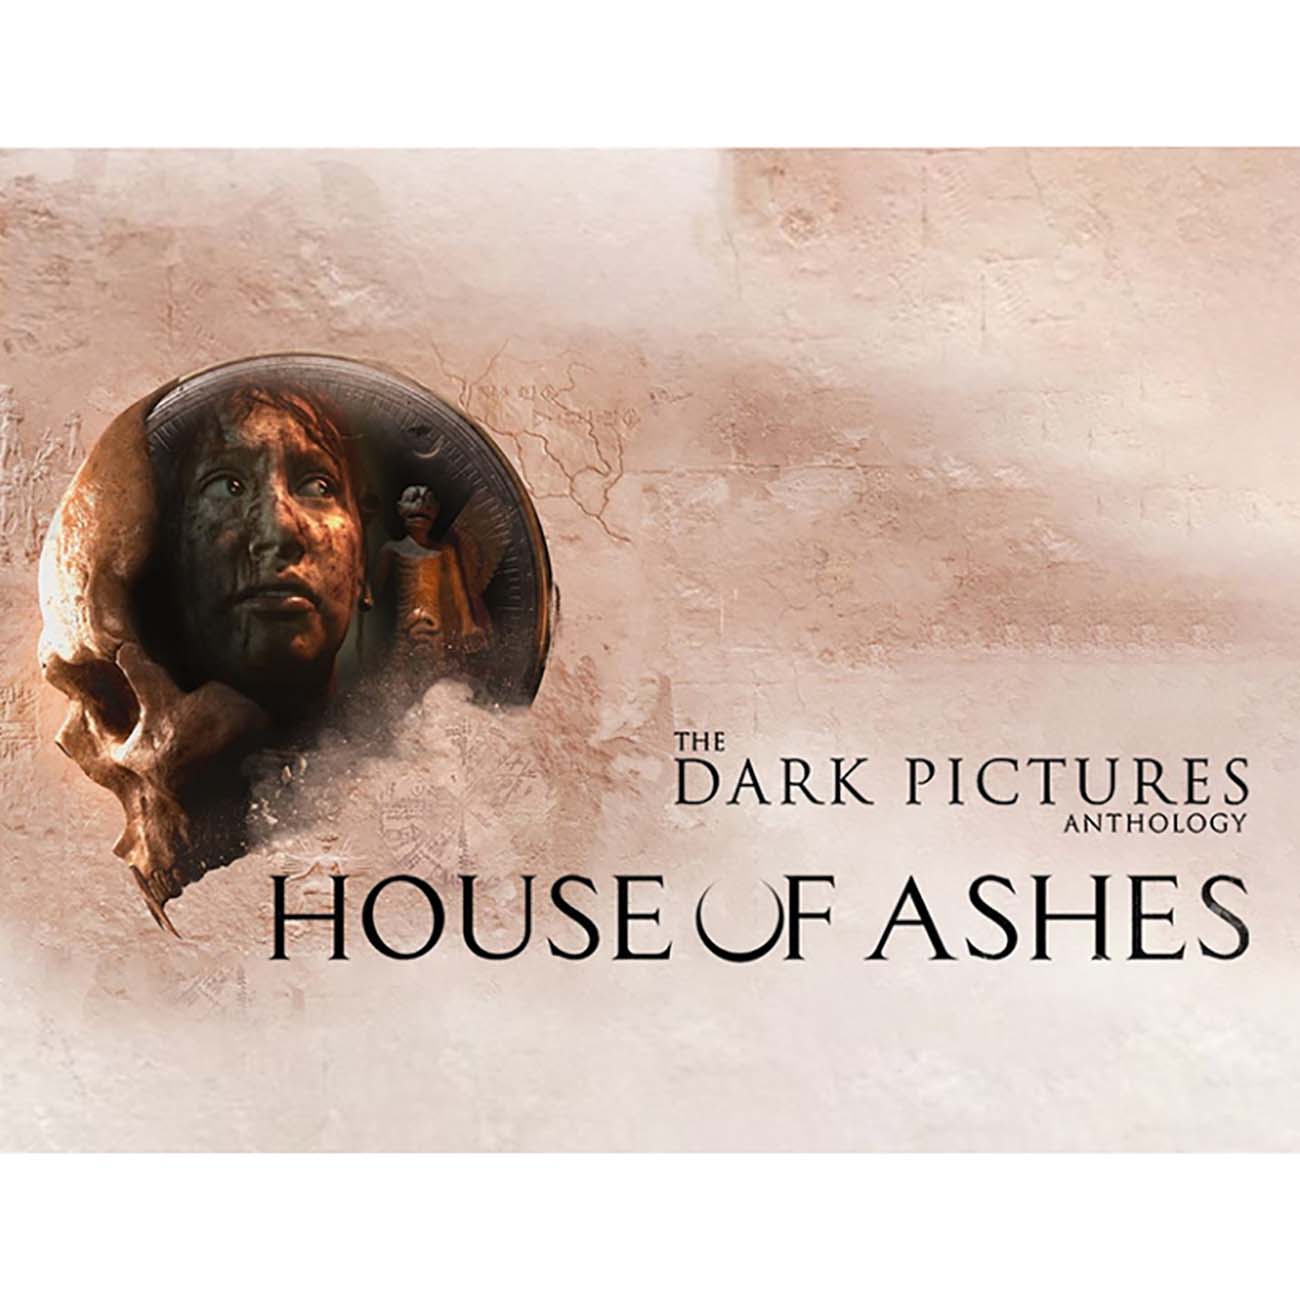 The dark pictures house of ashes steam фото 55